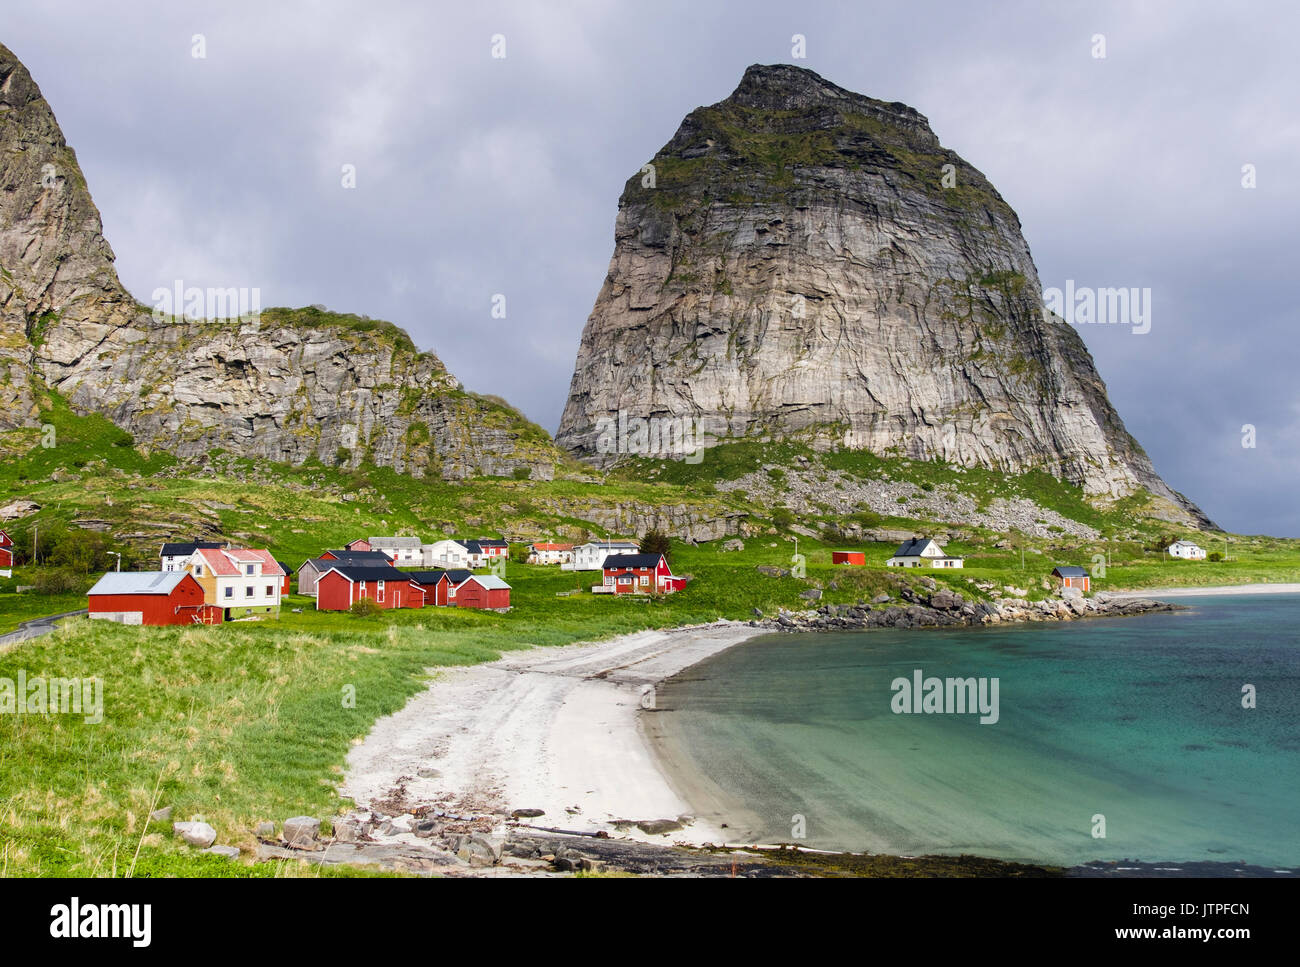 Sanna an old former fishing village houses below Trænstaven mountains in summer on Sanna island, Træna, Nordland county, Norway, Scandinavia Stock Photo